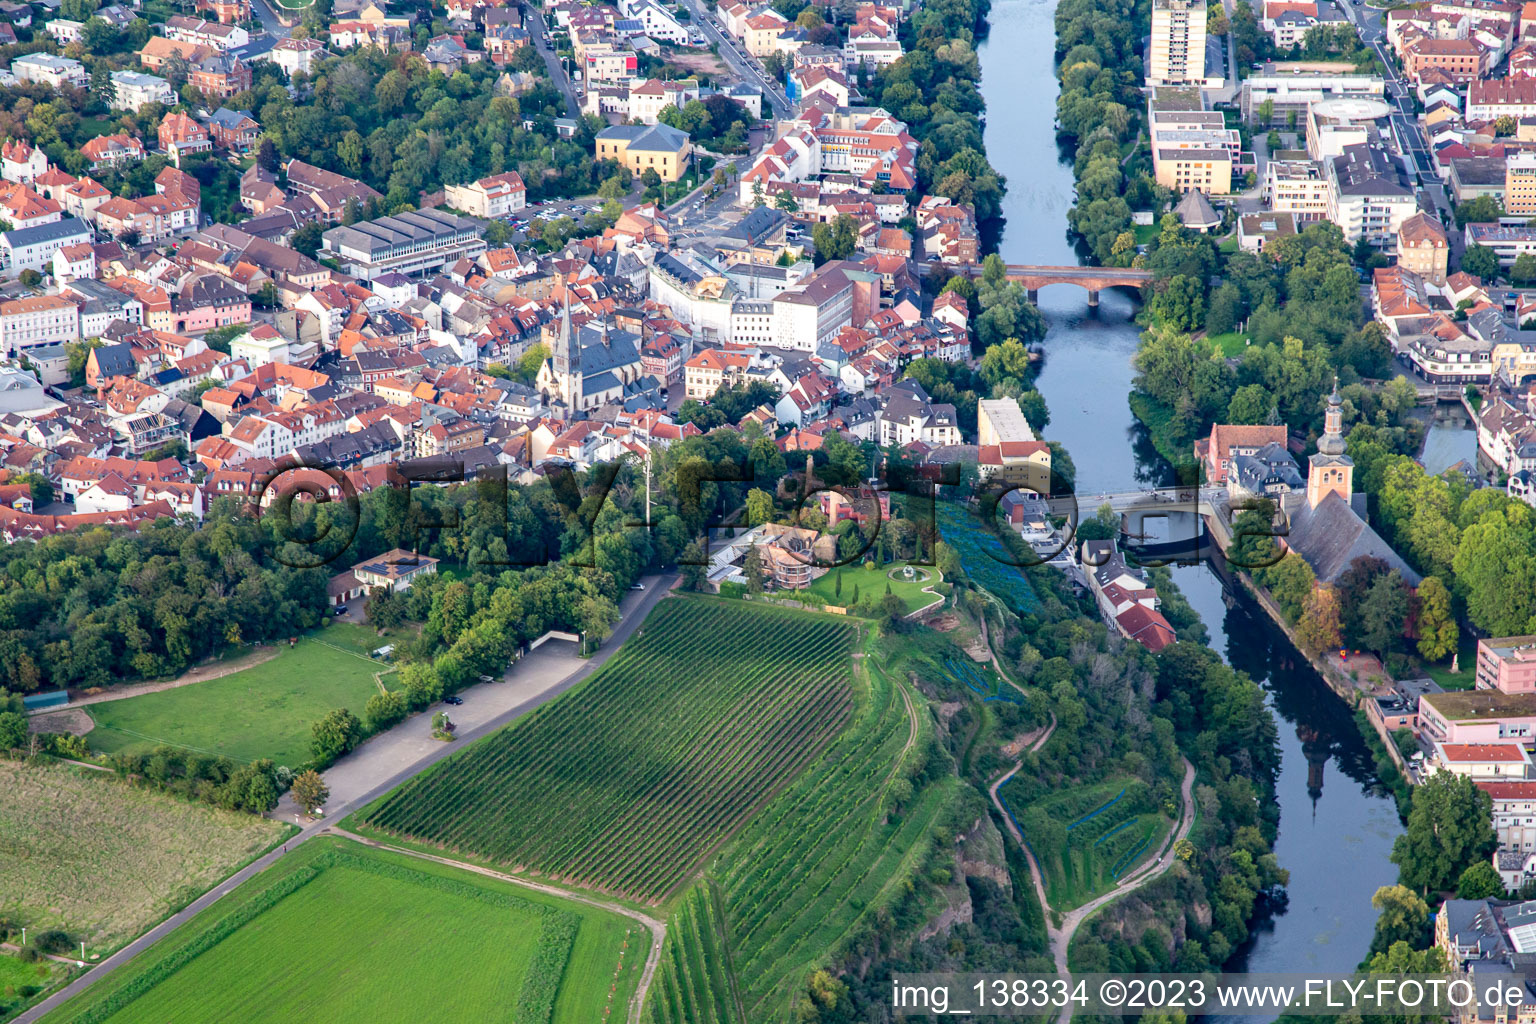 Aerial view of Kauzenburg by Mike's Catering on the Kauzenberg from the south in Bad Kreuznach in the state Rhineland-Palatinate, Germany